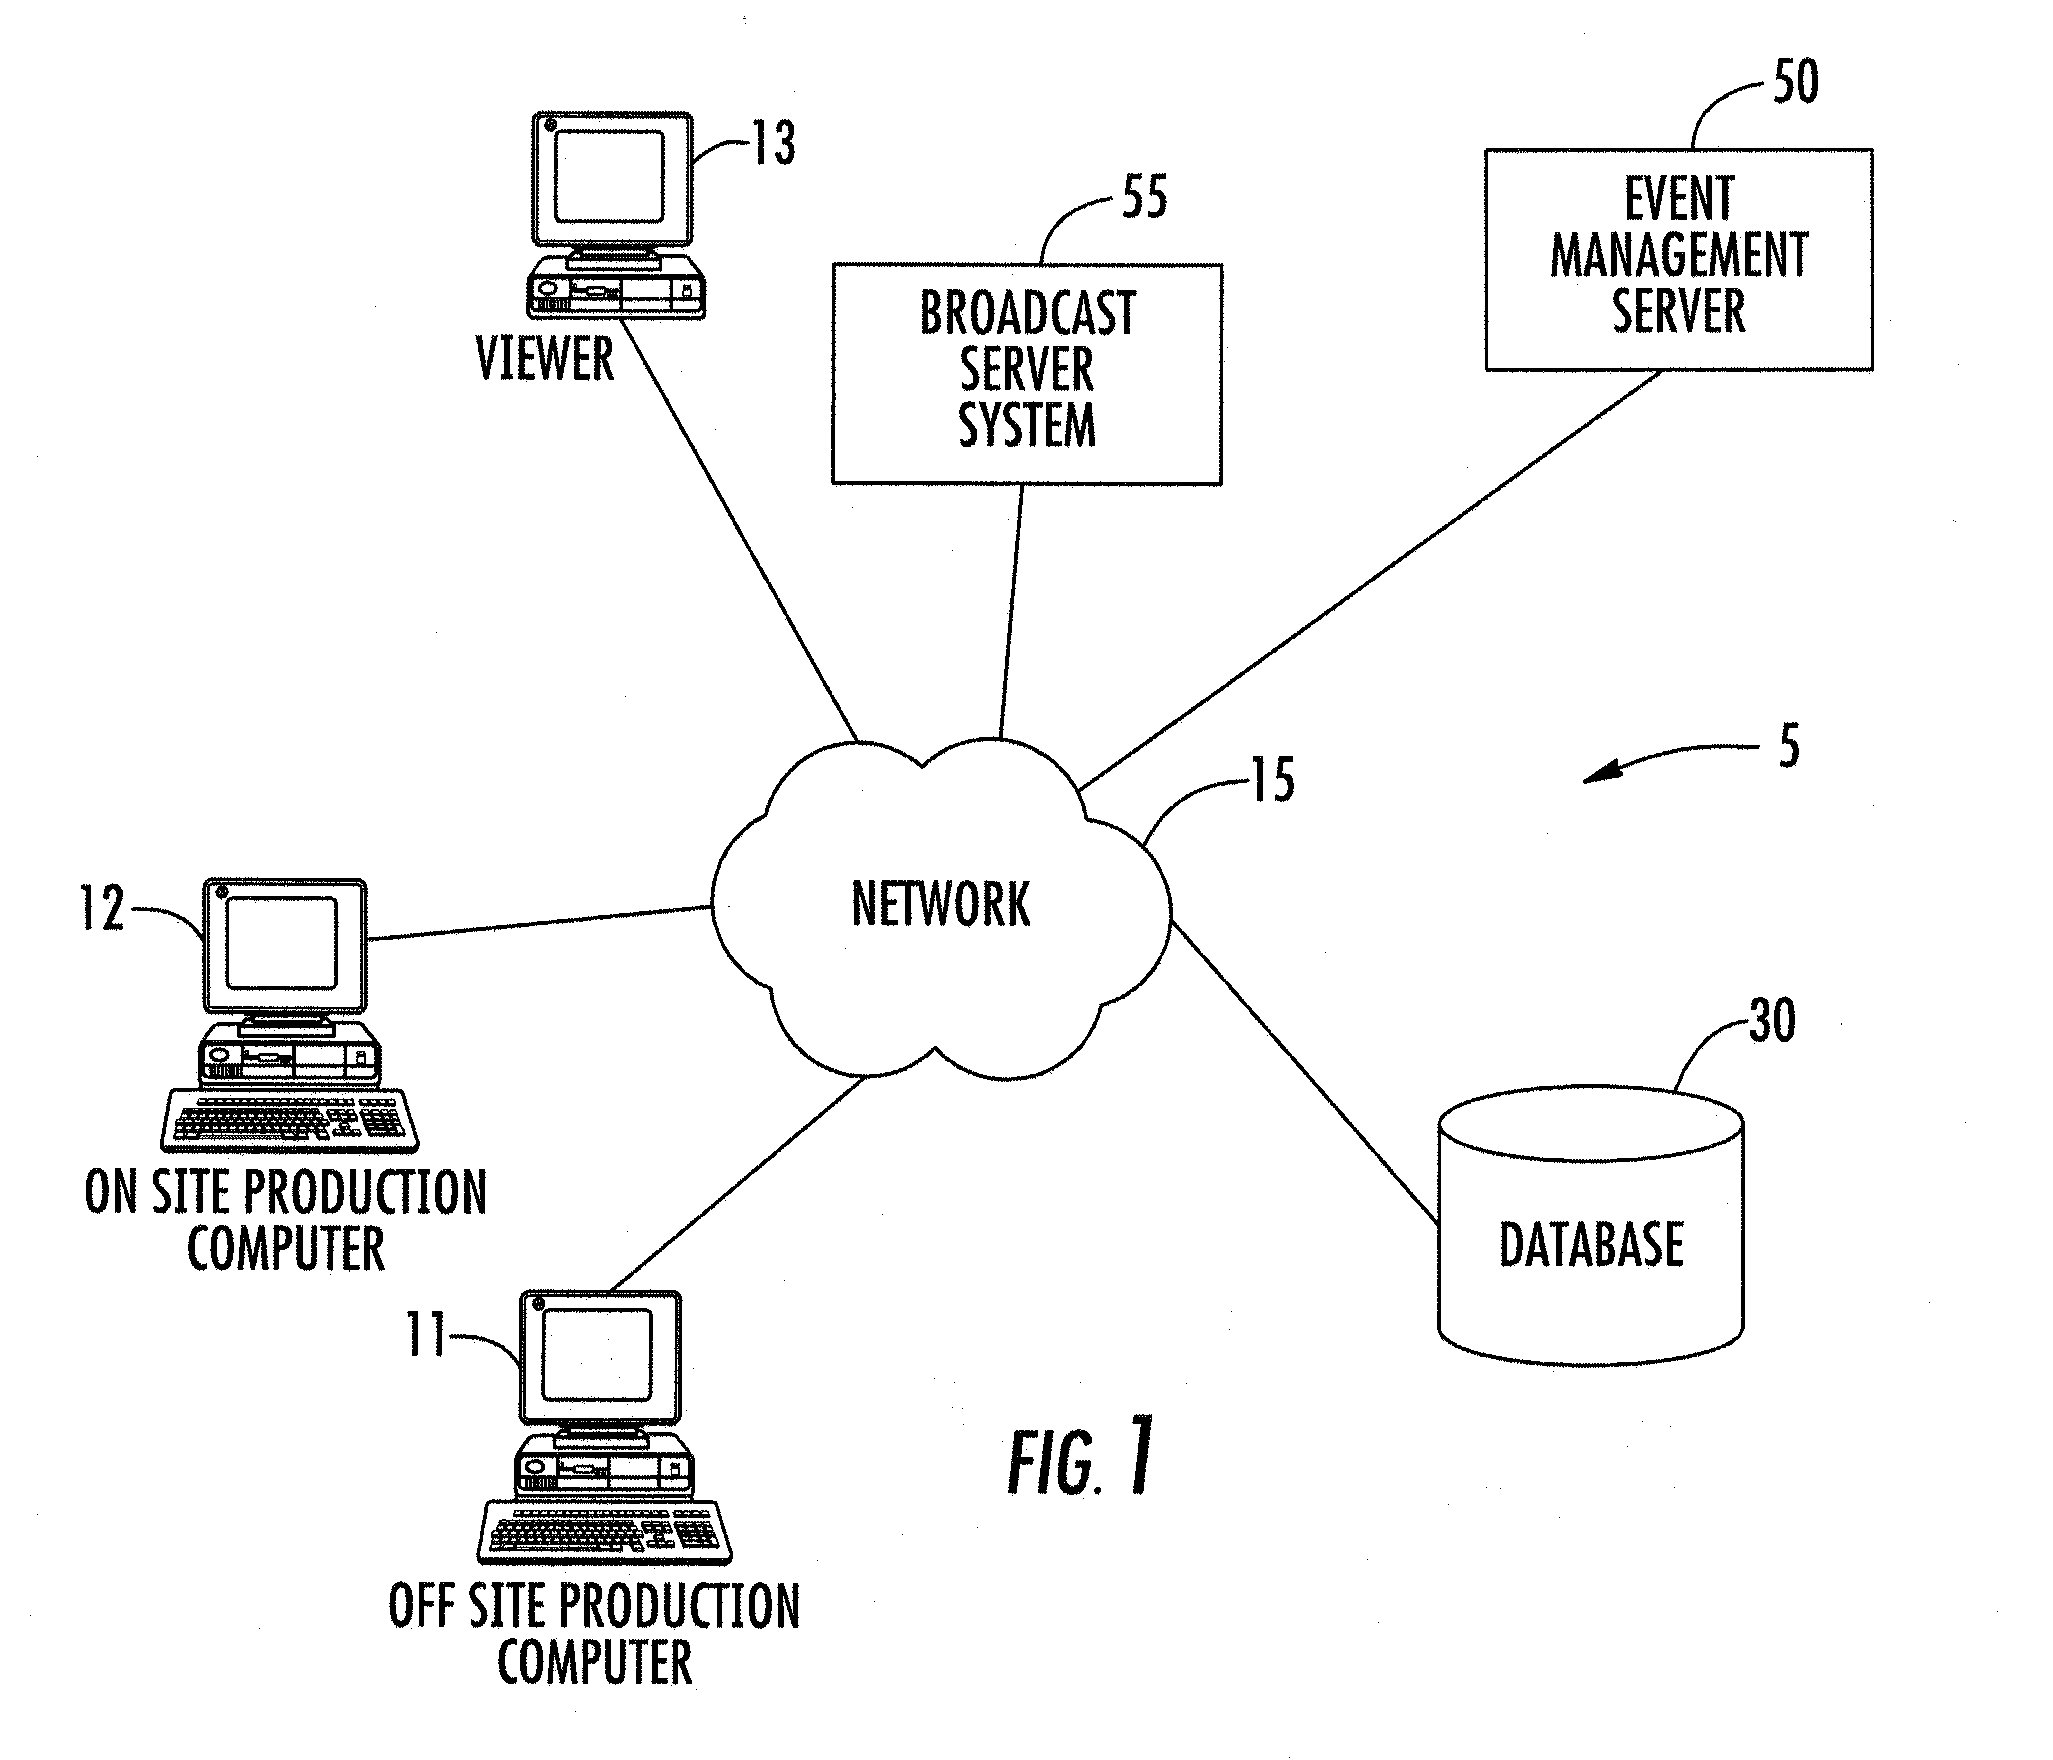 Systems and methods for scheduling, producing, and distributing a production of an event